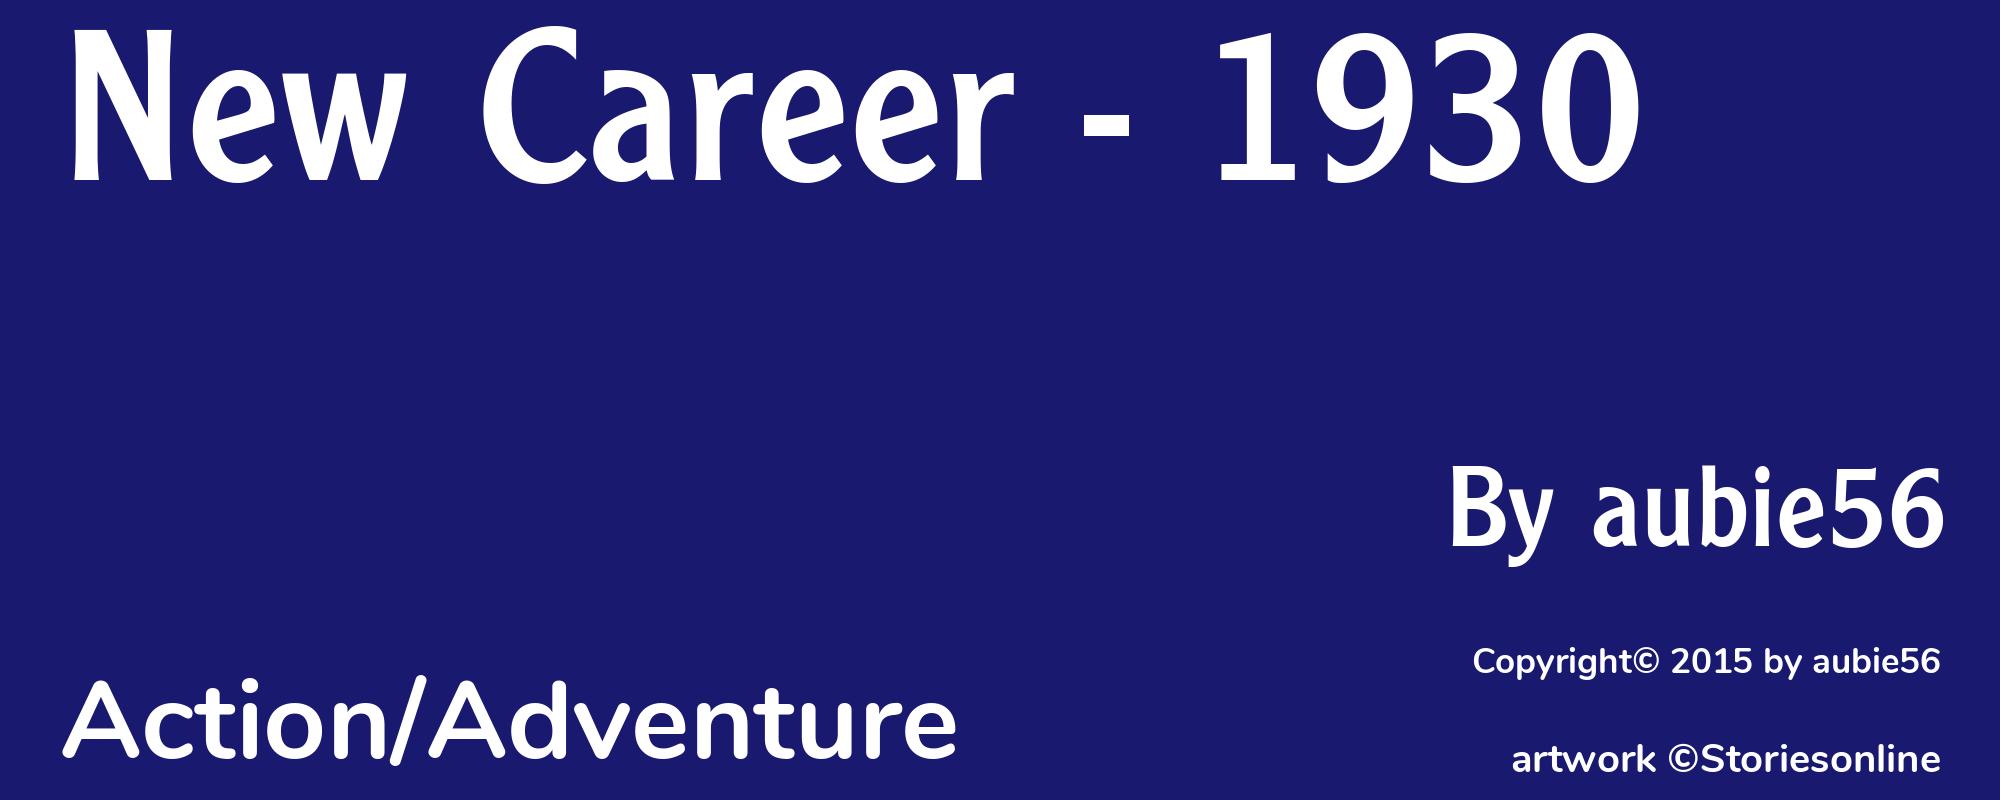 New Career - 1930 - Cover